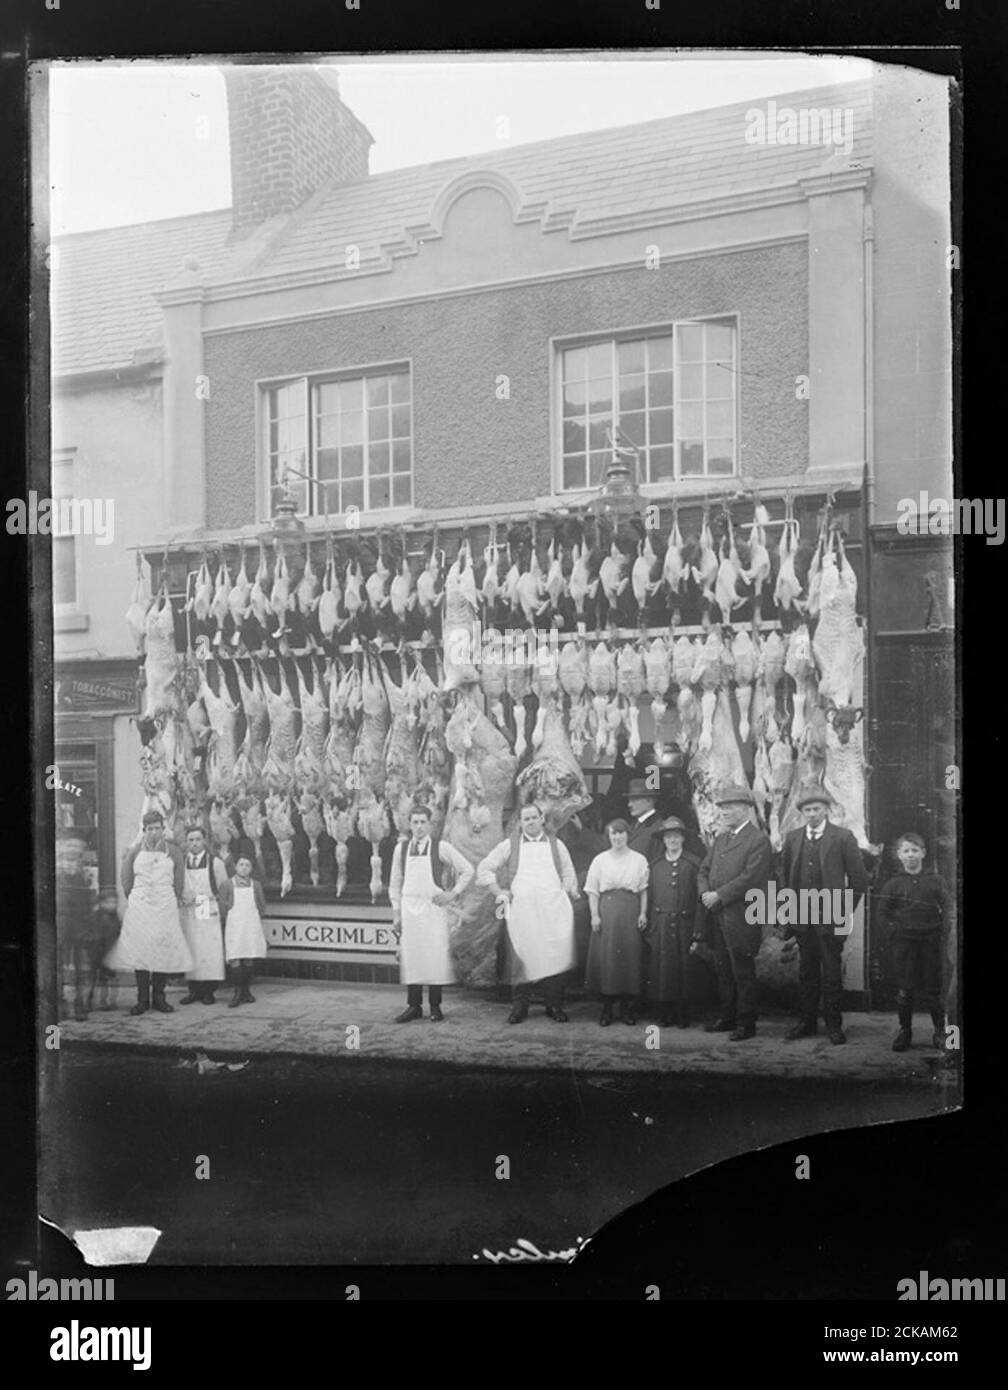 Historical butcher Black and White Stock Photos & Images - Alamy